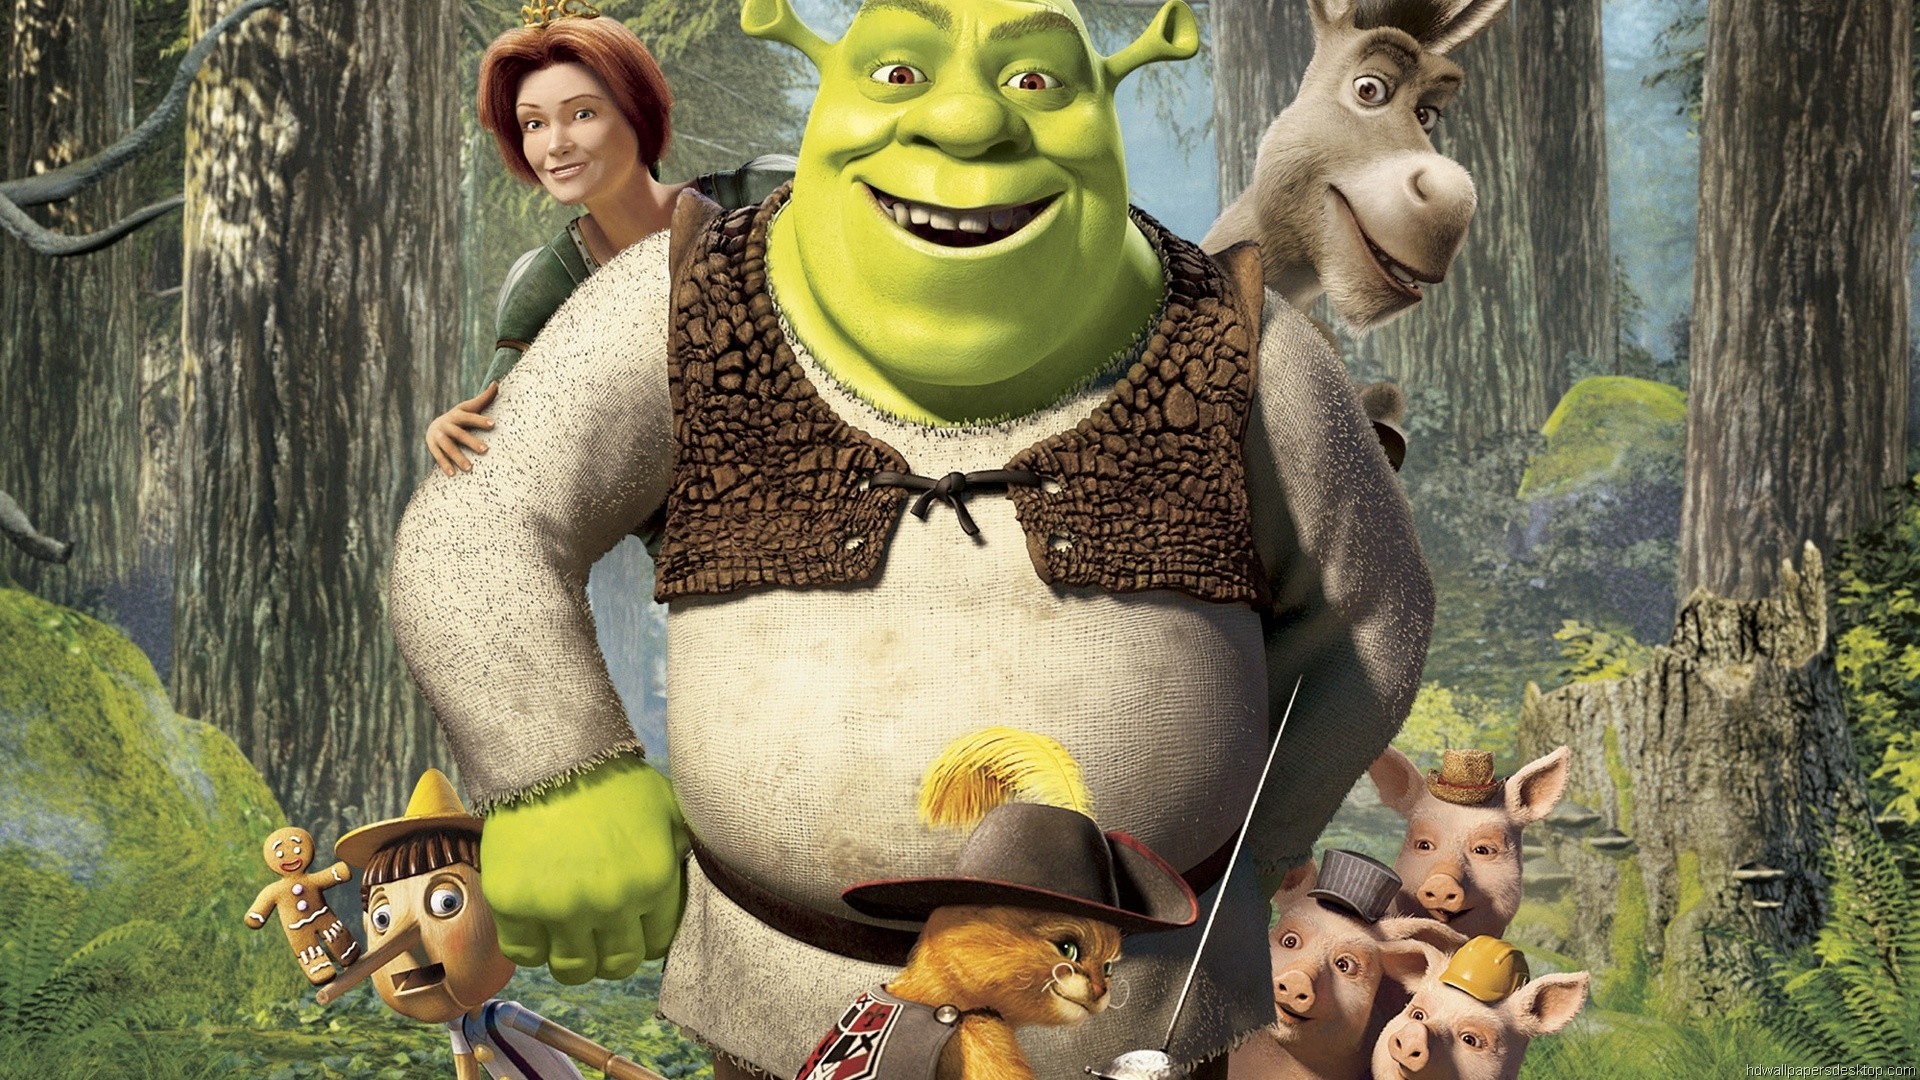 Movie Hd Wallpapers, Full Hd 1080p, Movies Wallpapers, - Shrek Wallpaper Hd  1080p - 1920x1080 Wallpaper 